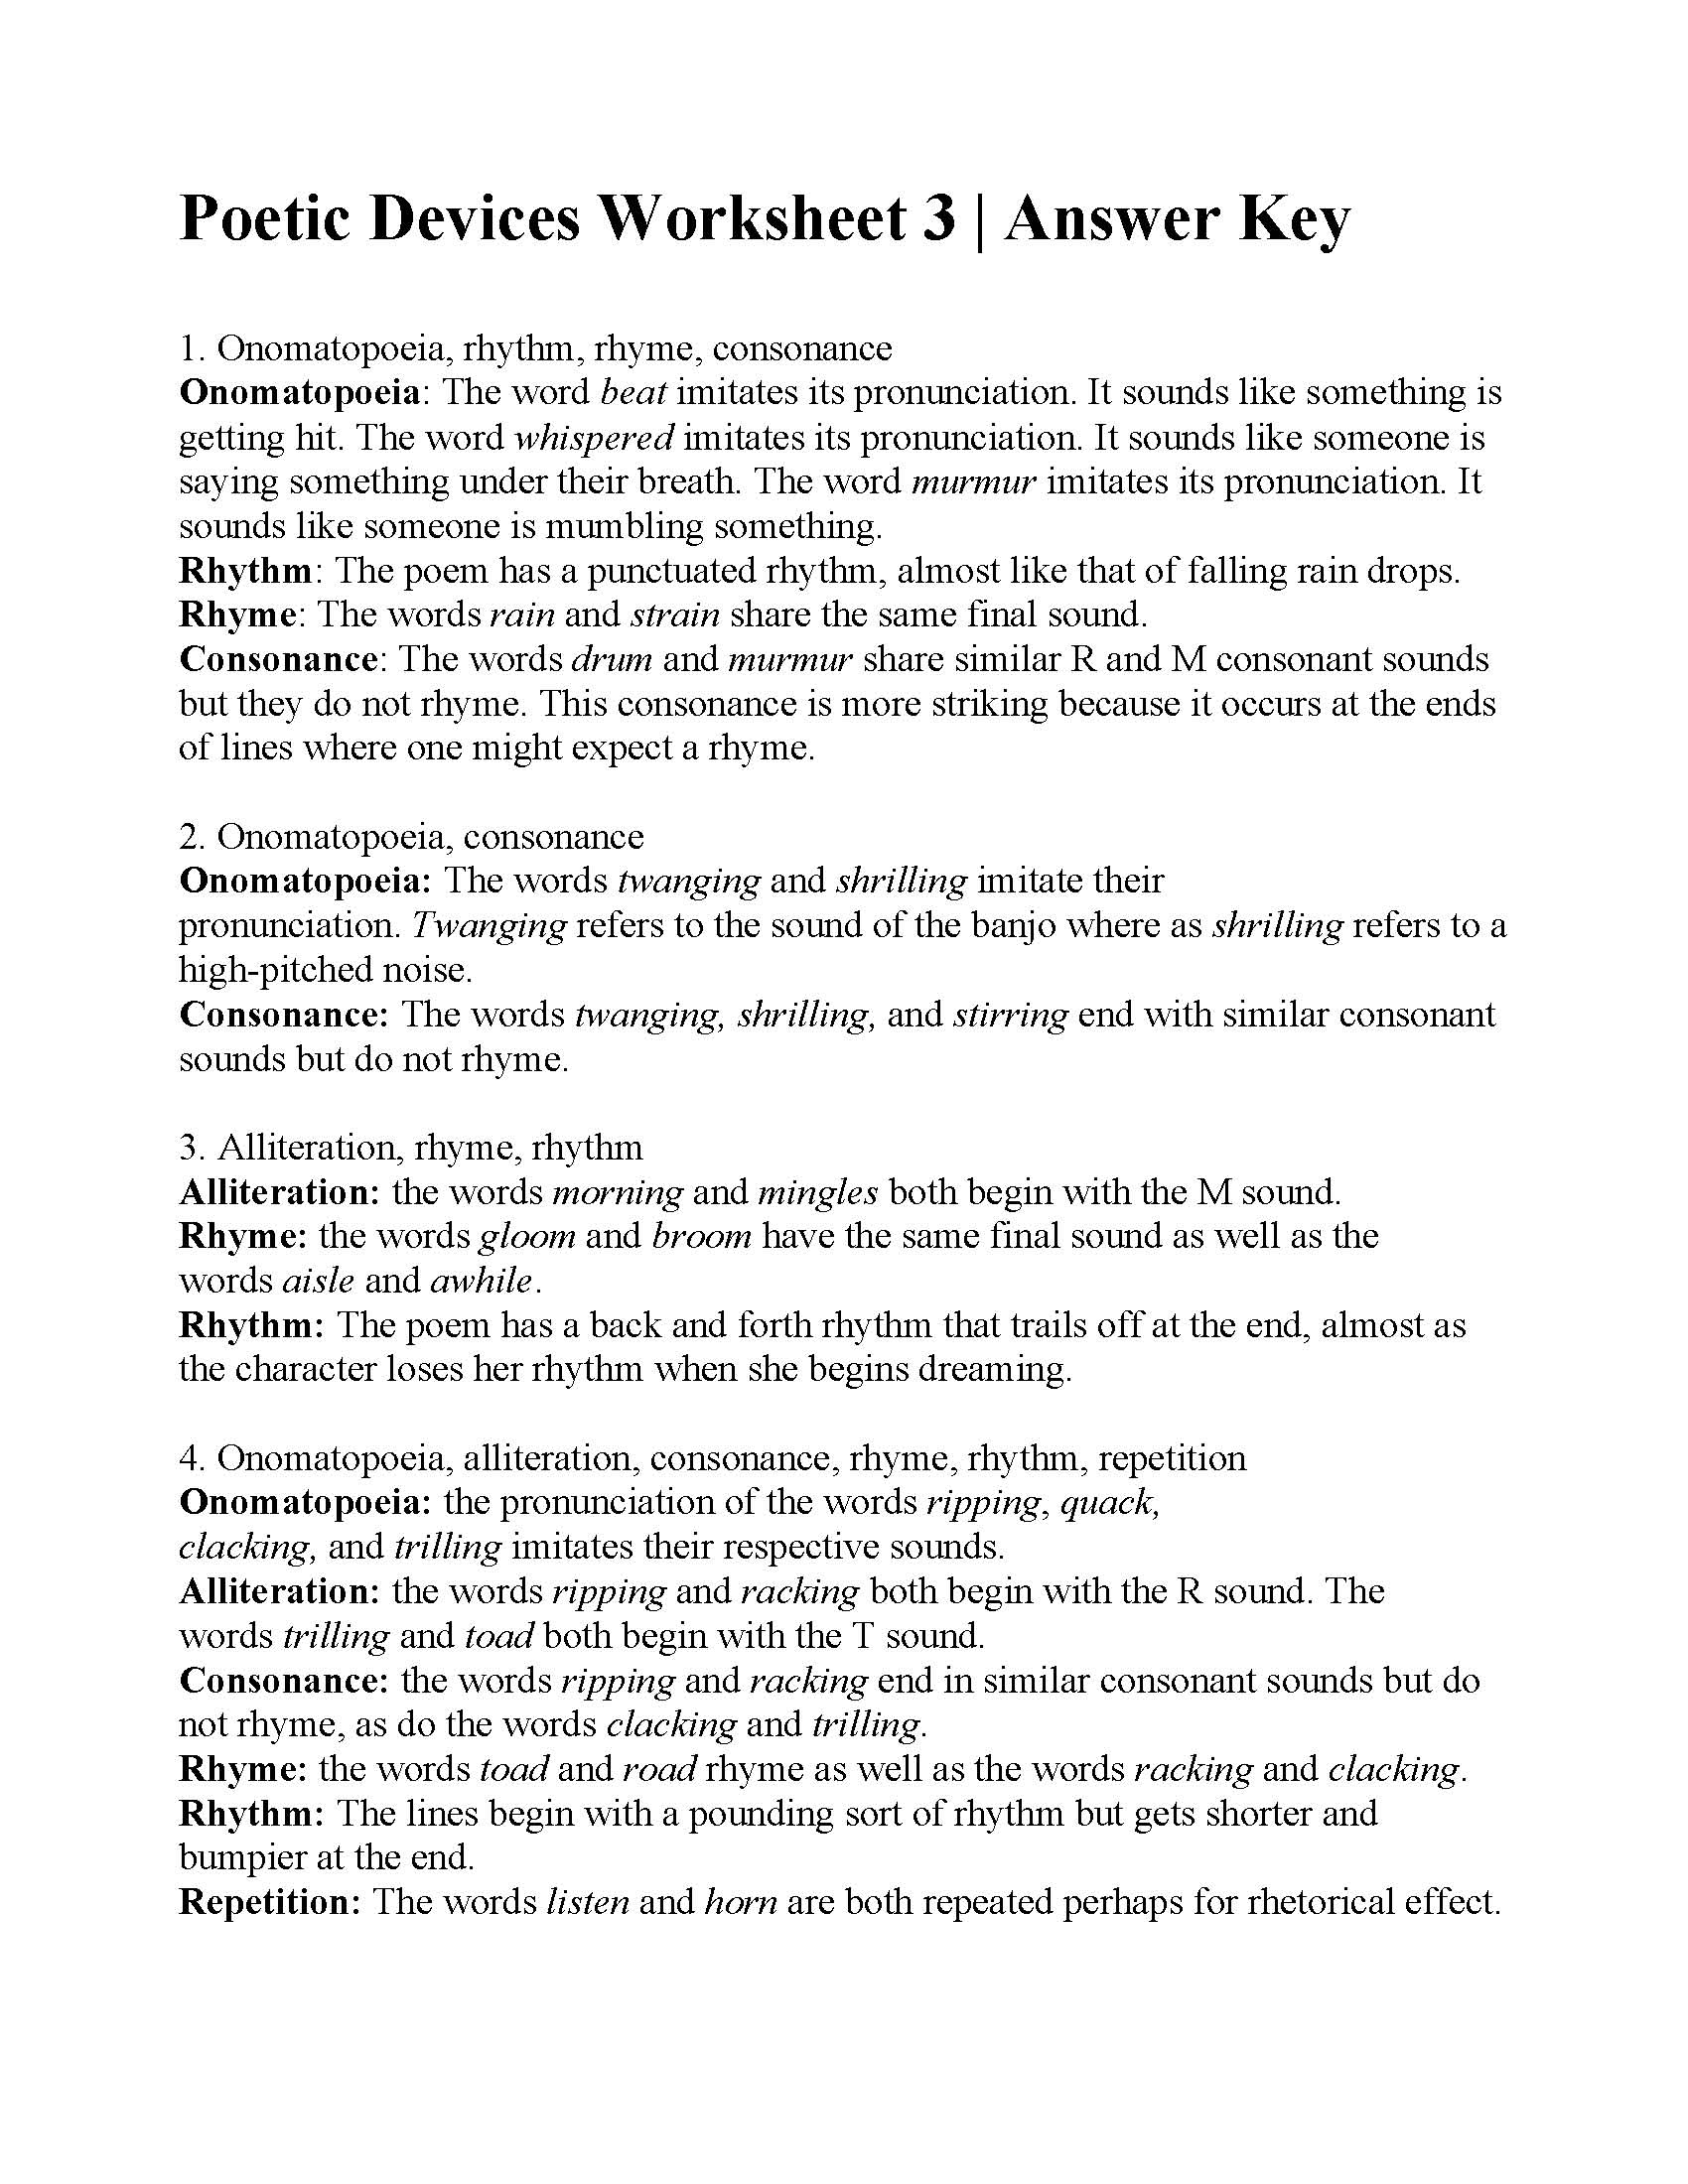 This is a preview image of Poetic Devices Worksheet 3. Click on it to enlarge it or view the source file.